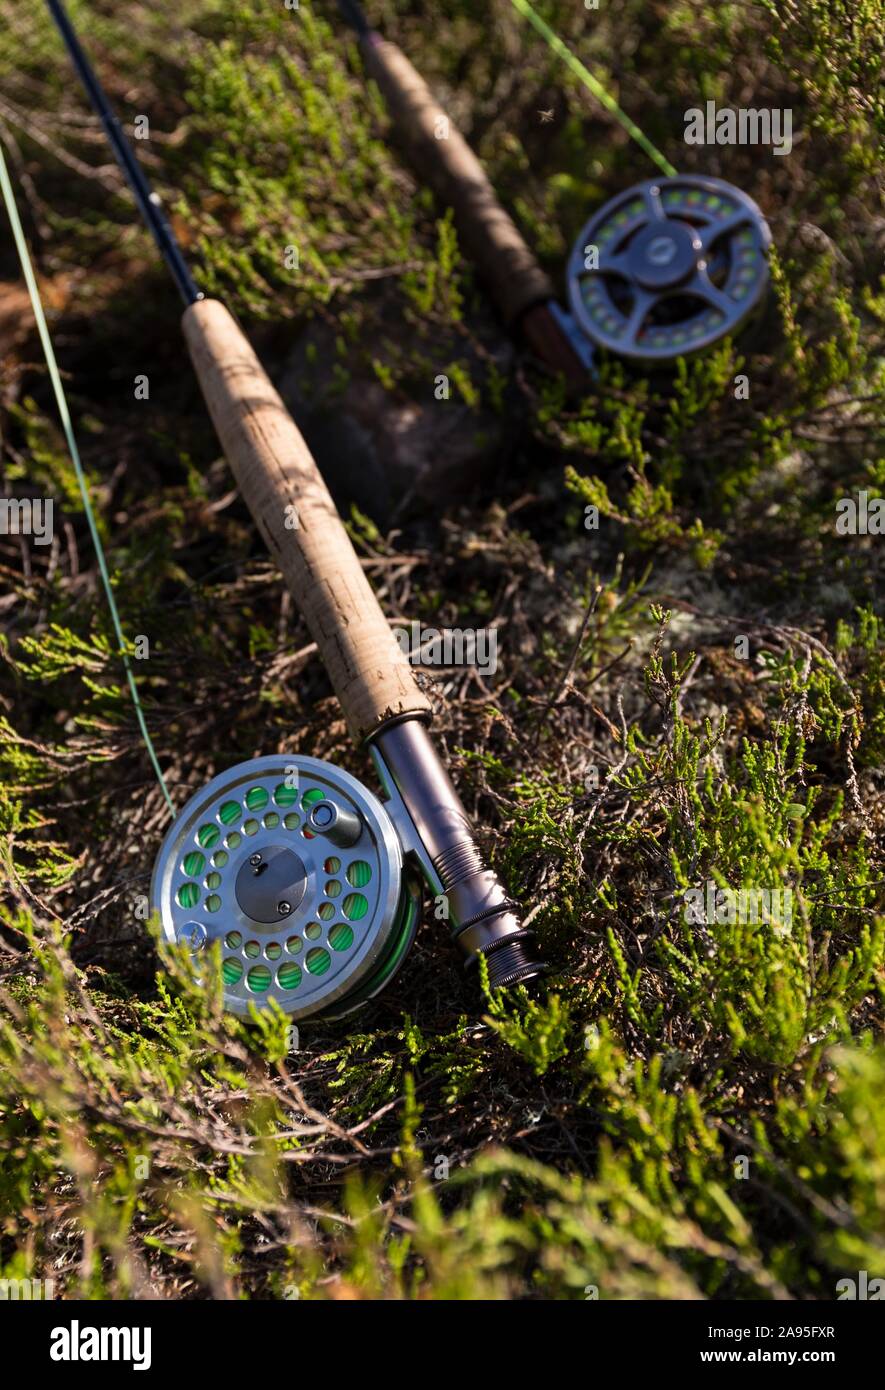 Two fly rods lying on the forest floor, partial view with handle, reel and string, Harjedalen, Sweden Stock Photo